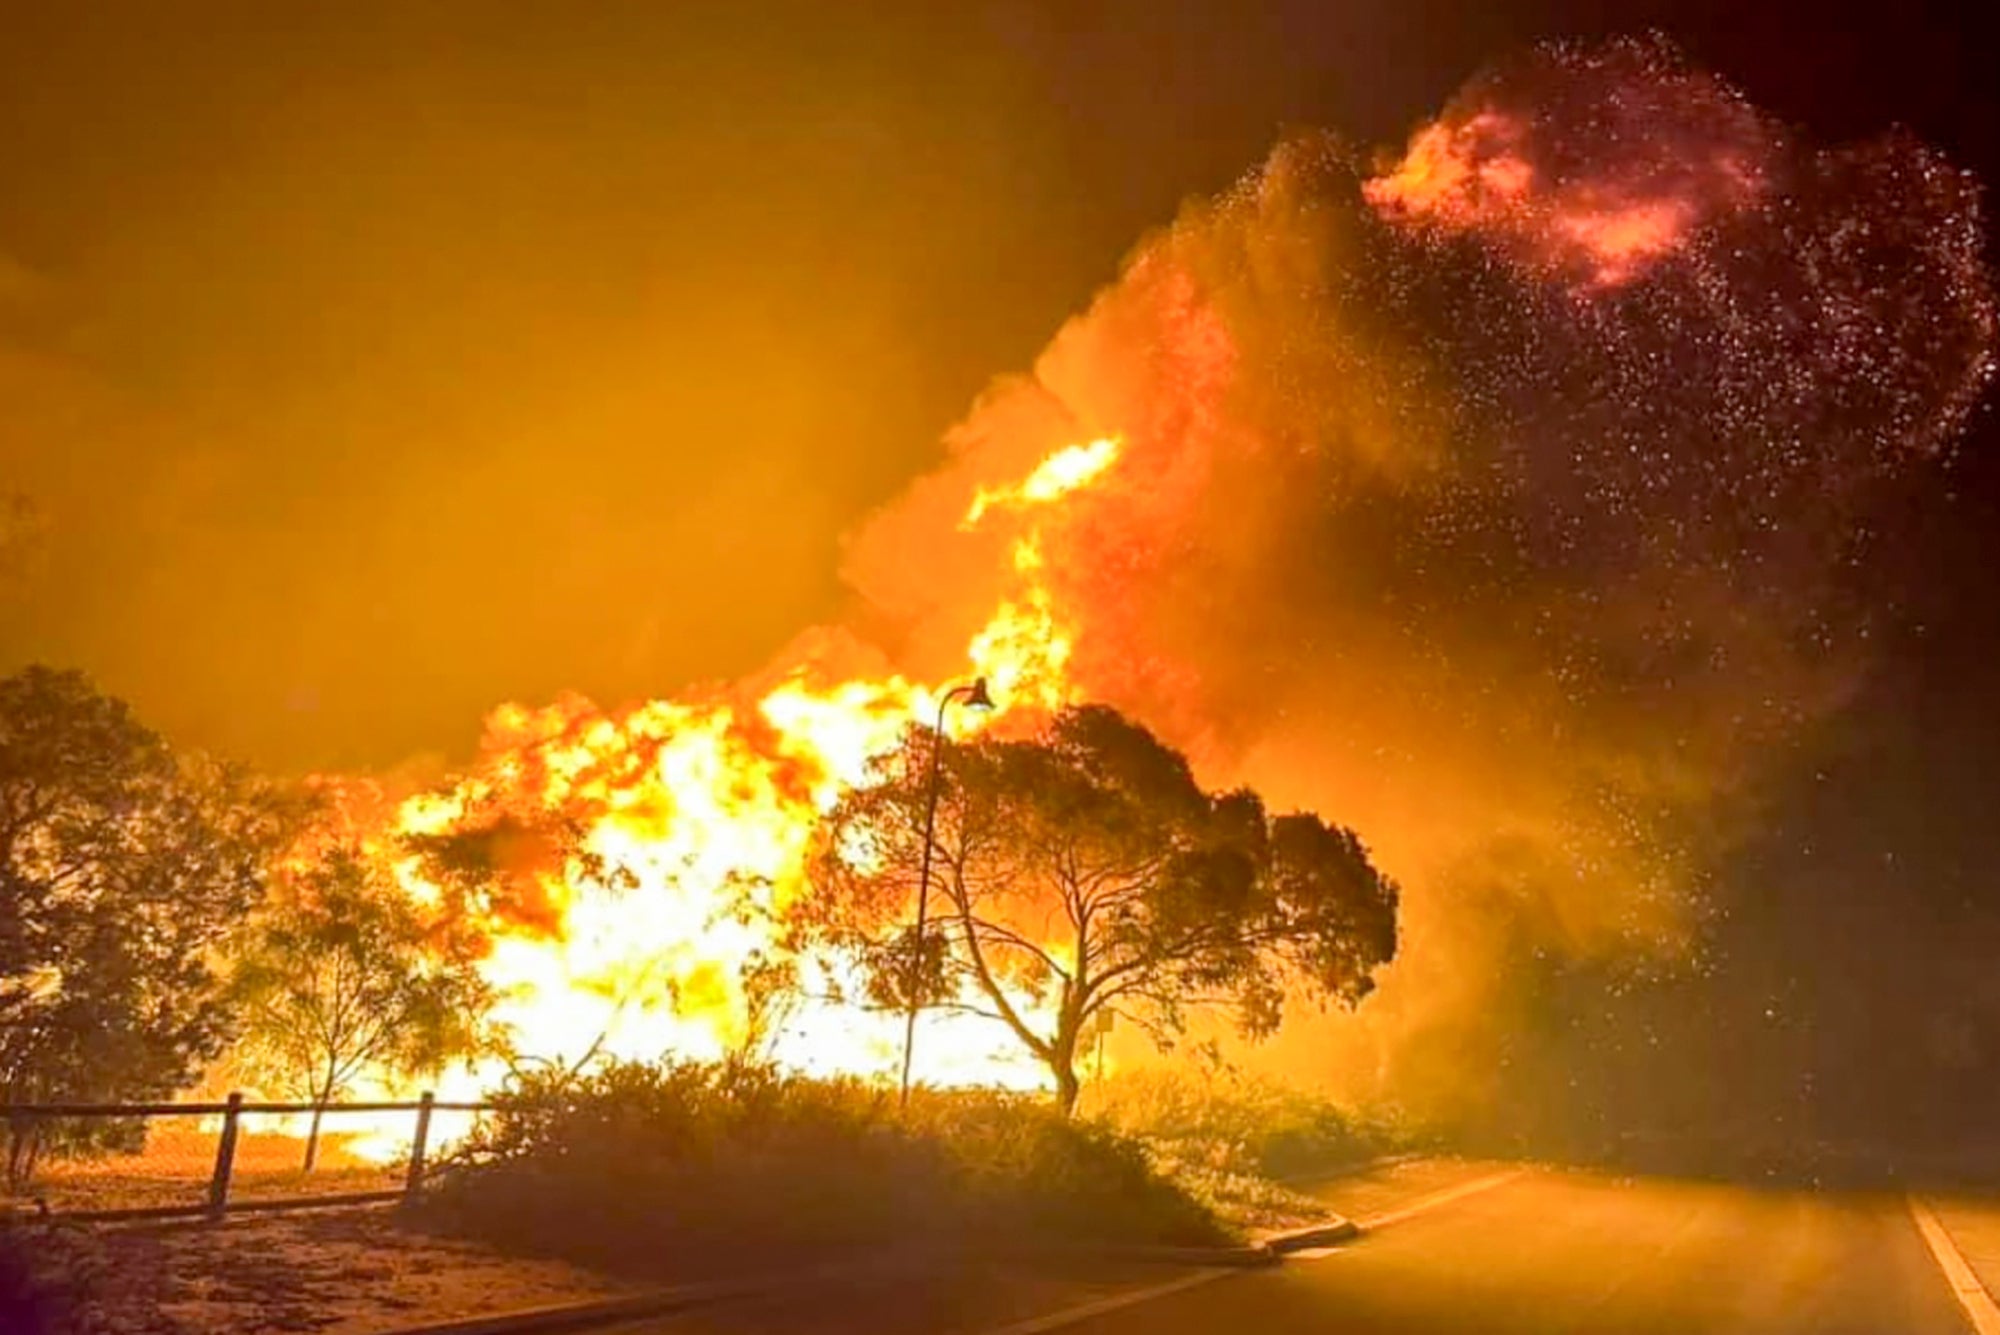 Wildfires in Australia earlier this month